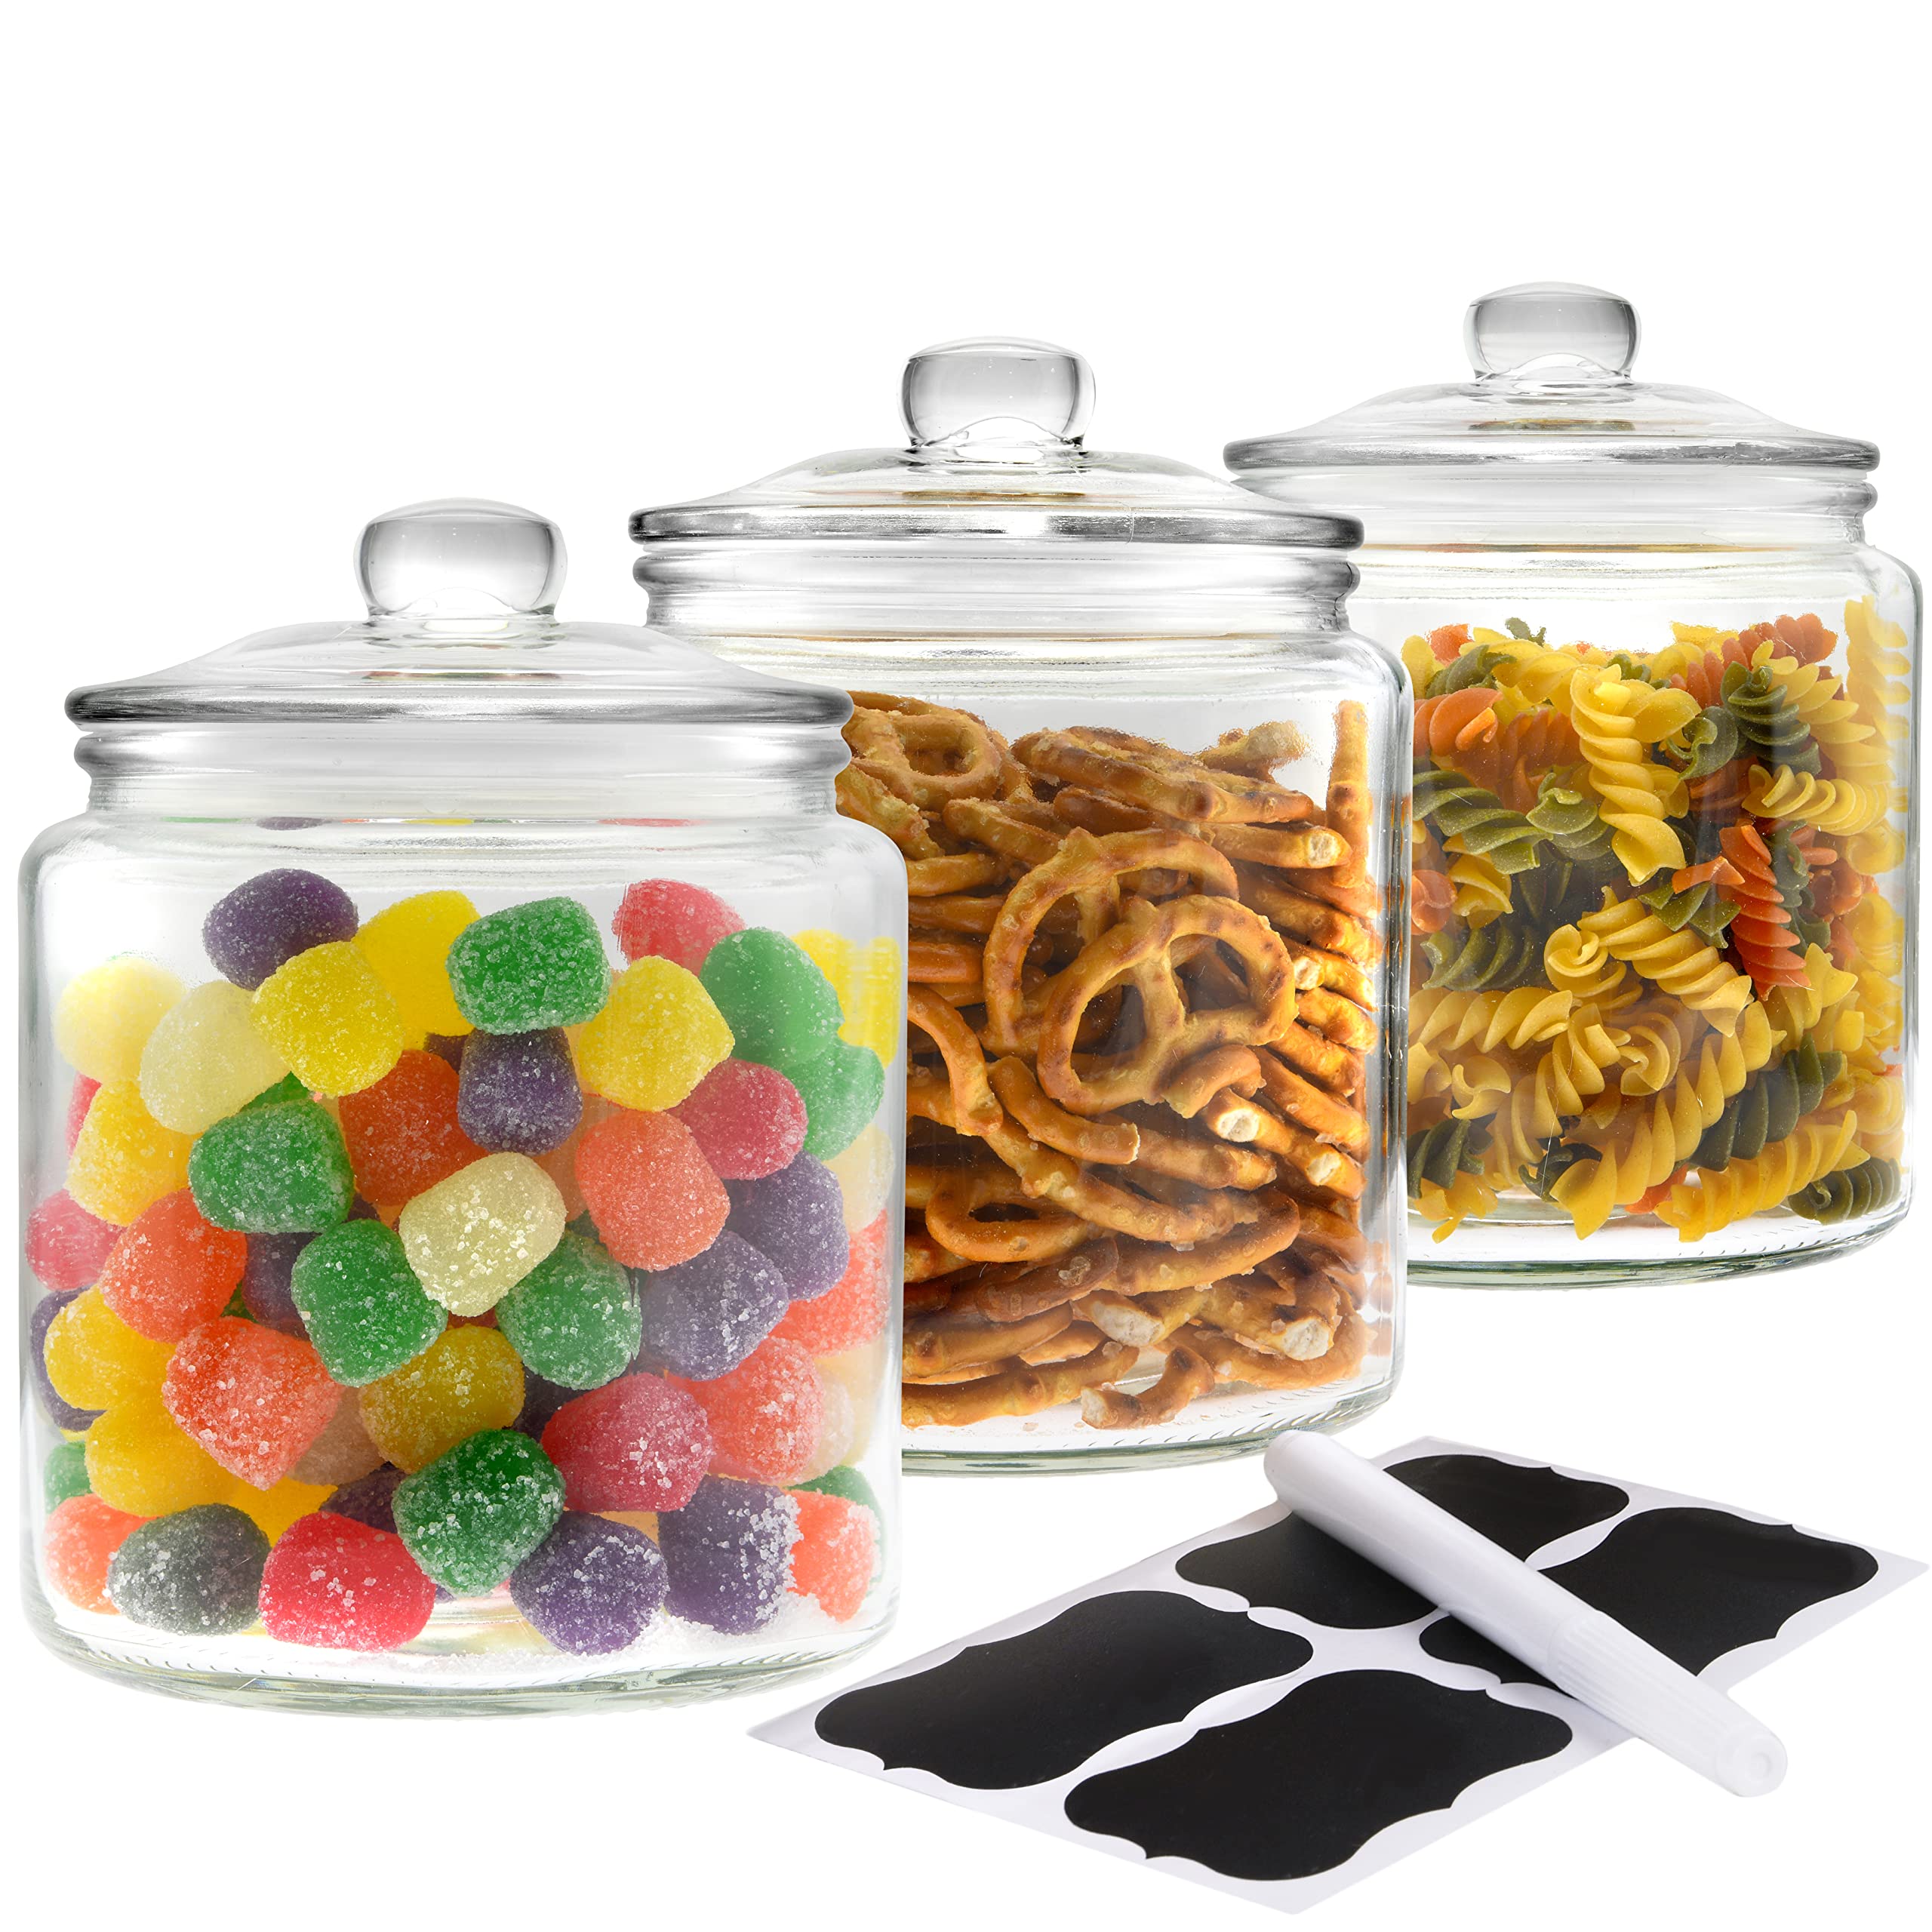 GADGETWIZ Glass Cookie Jar - Glass Apothecary Jars With Lids - Canister Sets For Kitchen Counter - Glass Candy Jars - Glass Canisters Set Of 3 - Sugar Containers For Countertop (3 pack 32oz)  - Like New